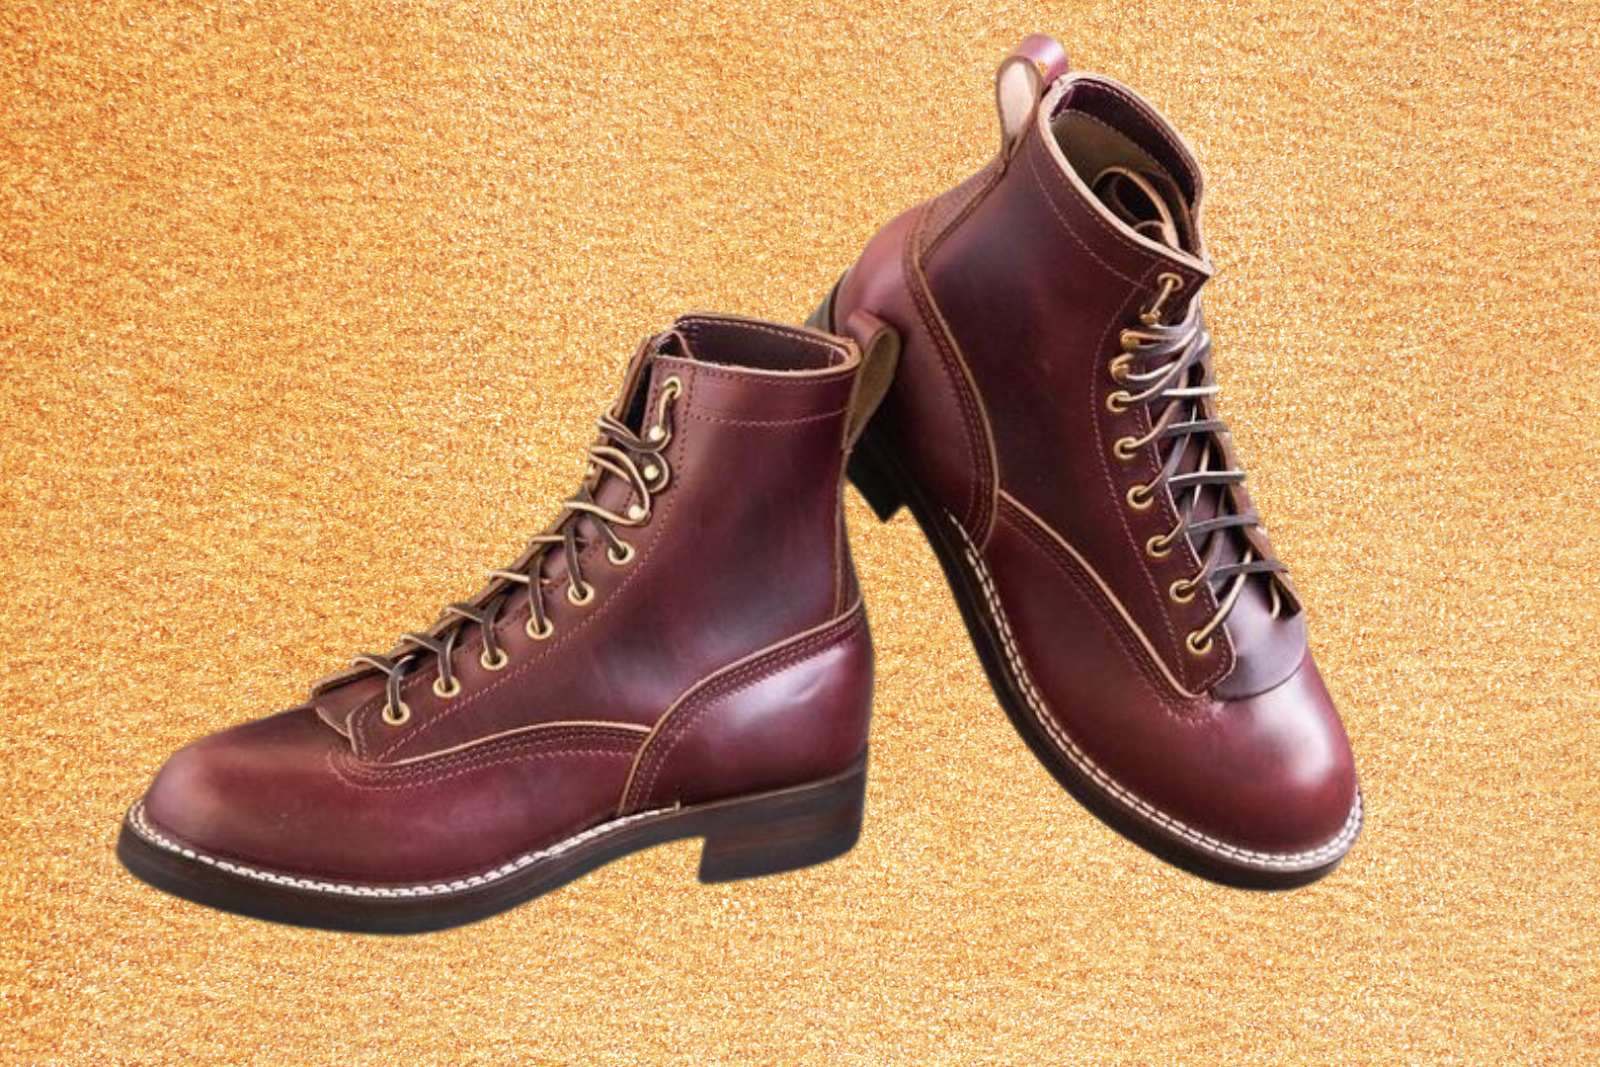 What Are Heritage Boots?